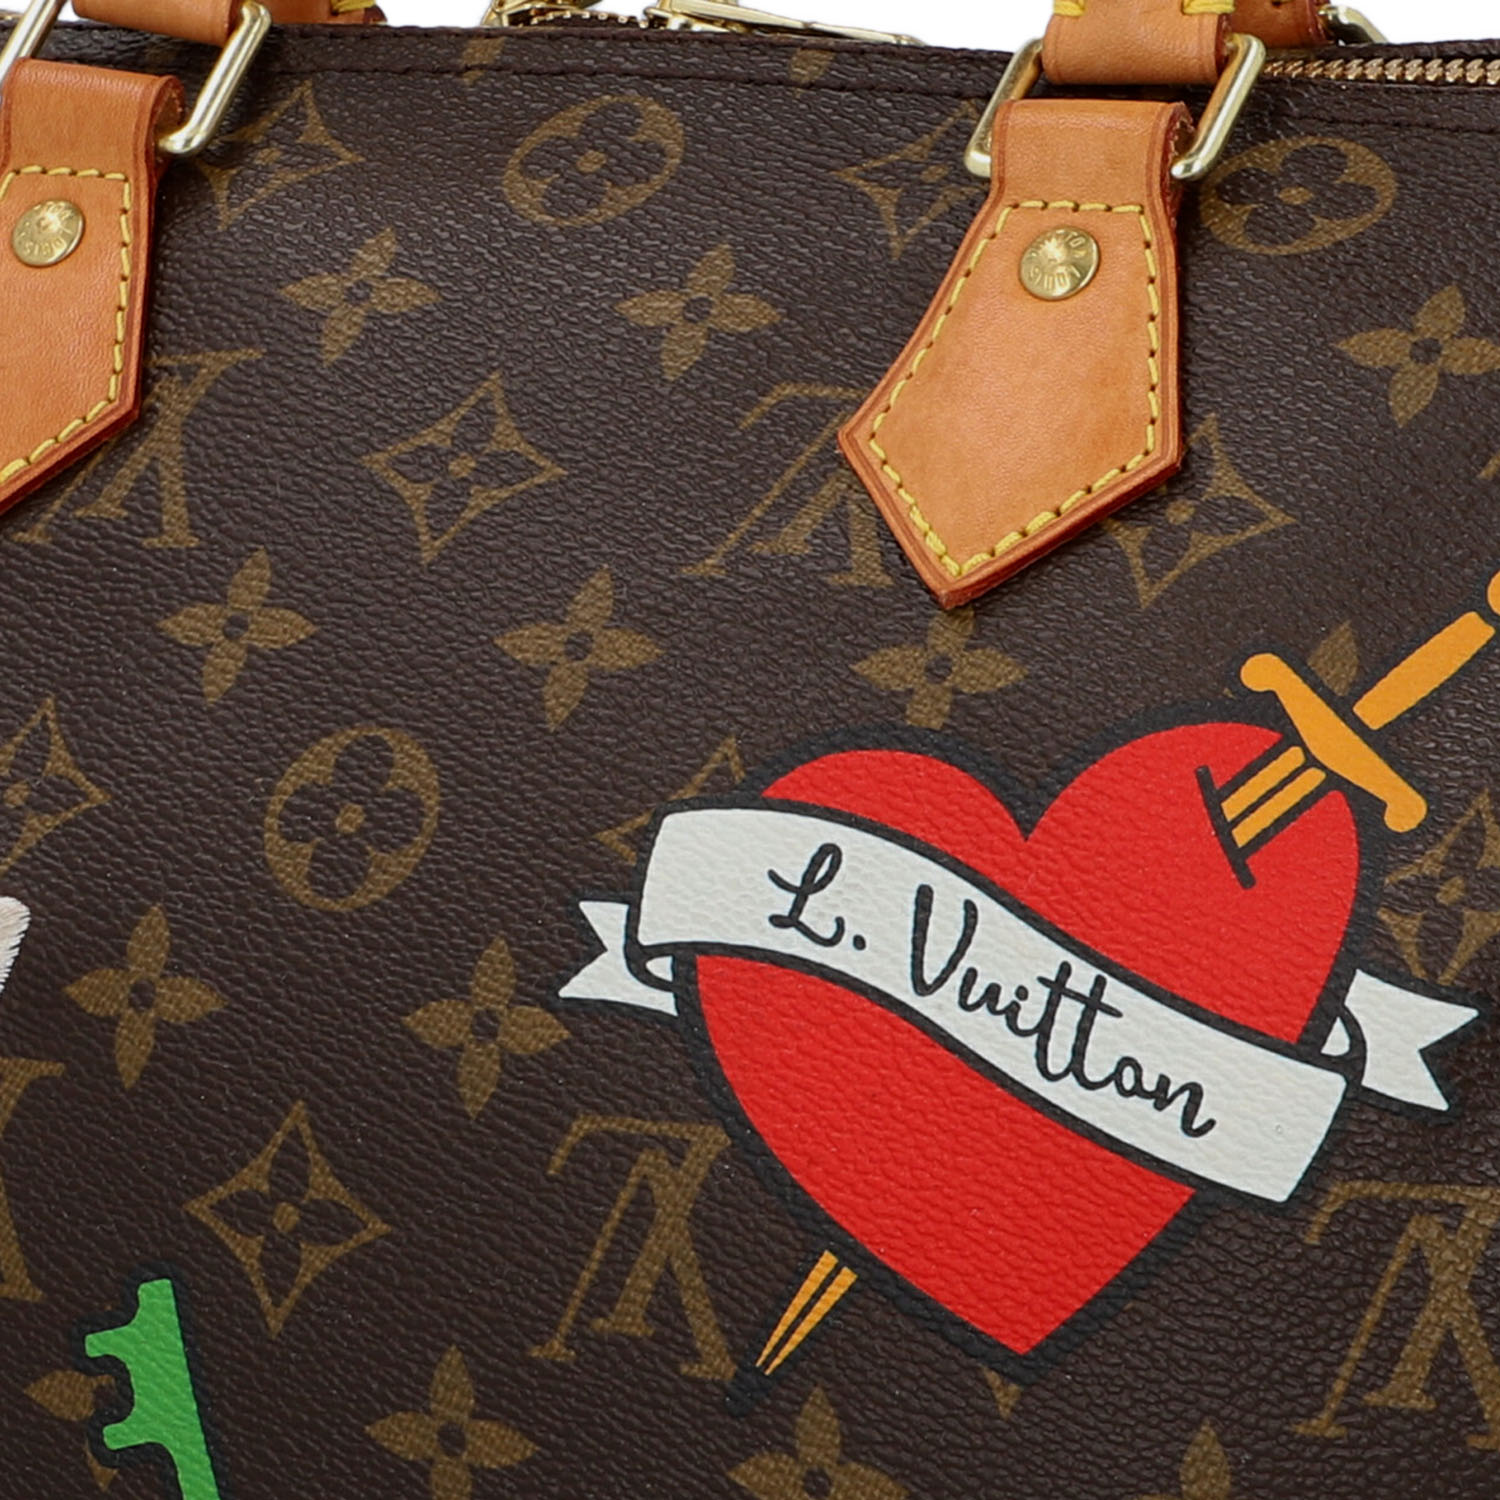 LOUIS VUITTON Handtasche "SPEEDY 30", Capsule Kollektion Hiver 2018.Limited Edition. M - Image 7 of 9